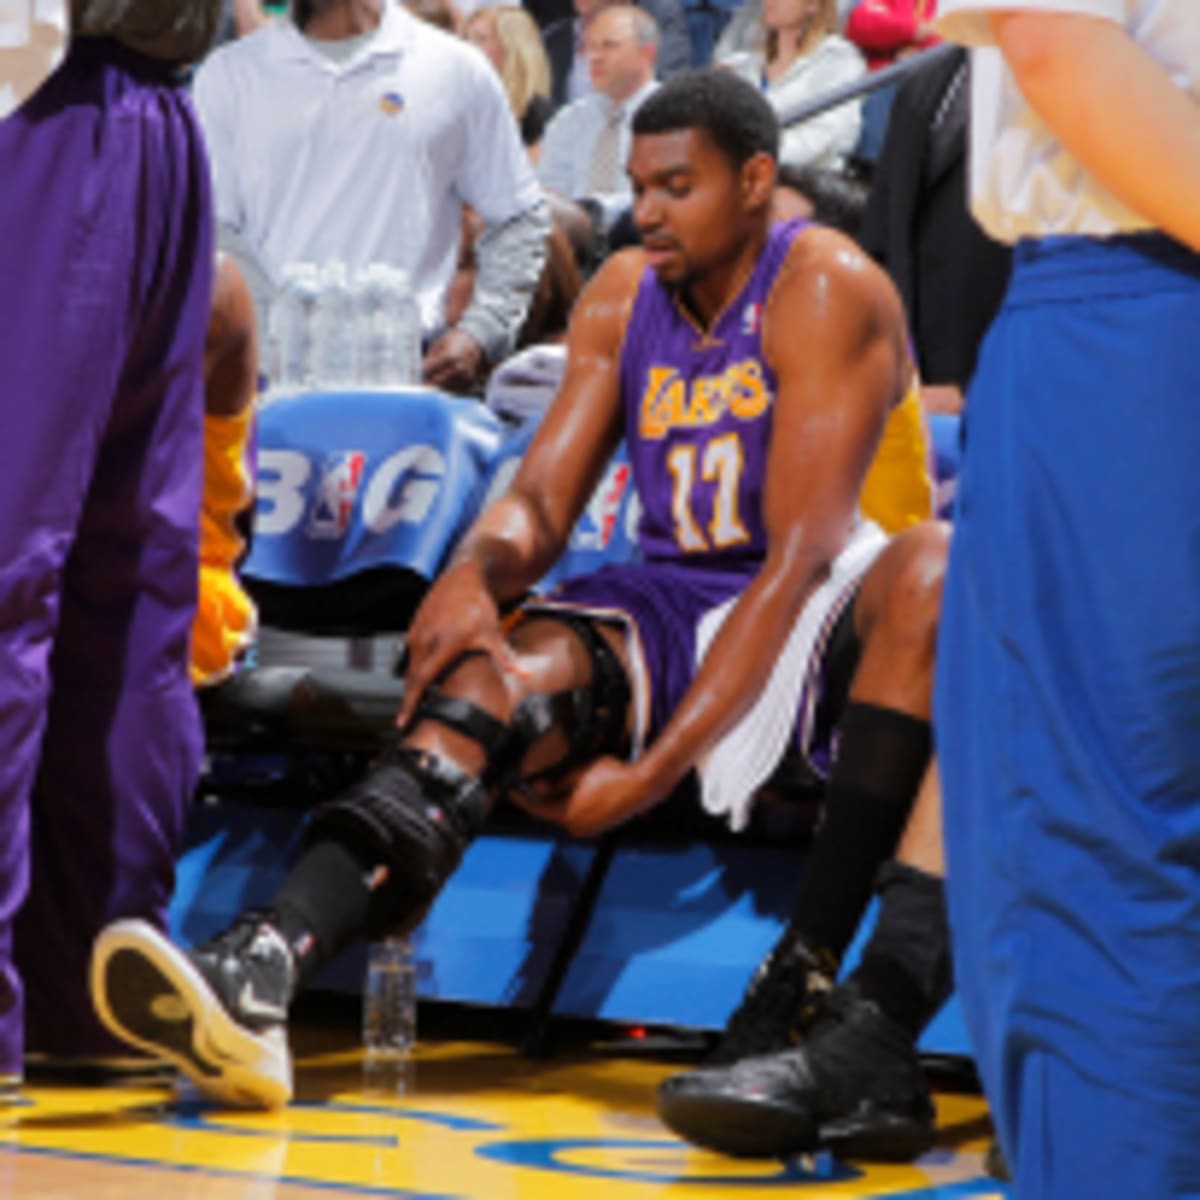 The Basketball Machine: Andrew Bynum braided his Fro' and it looks